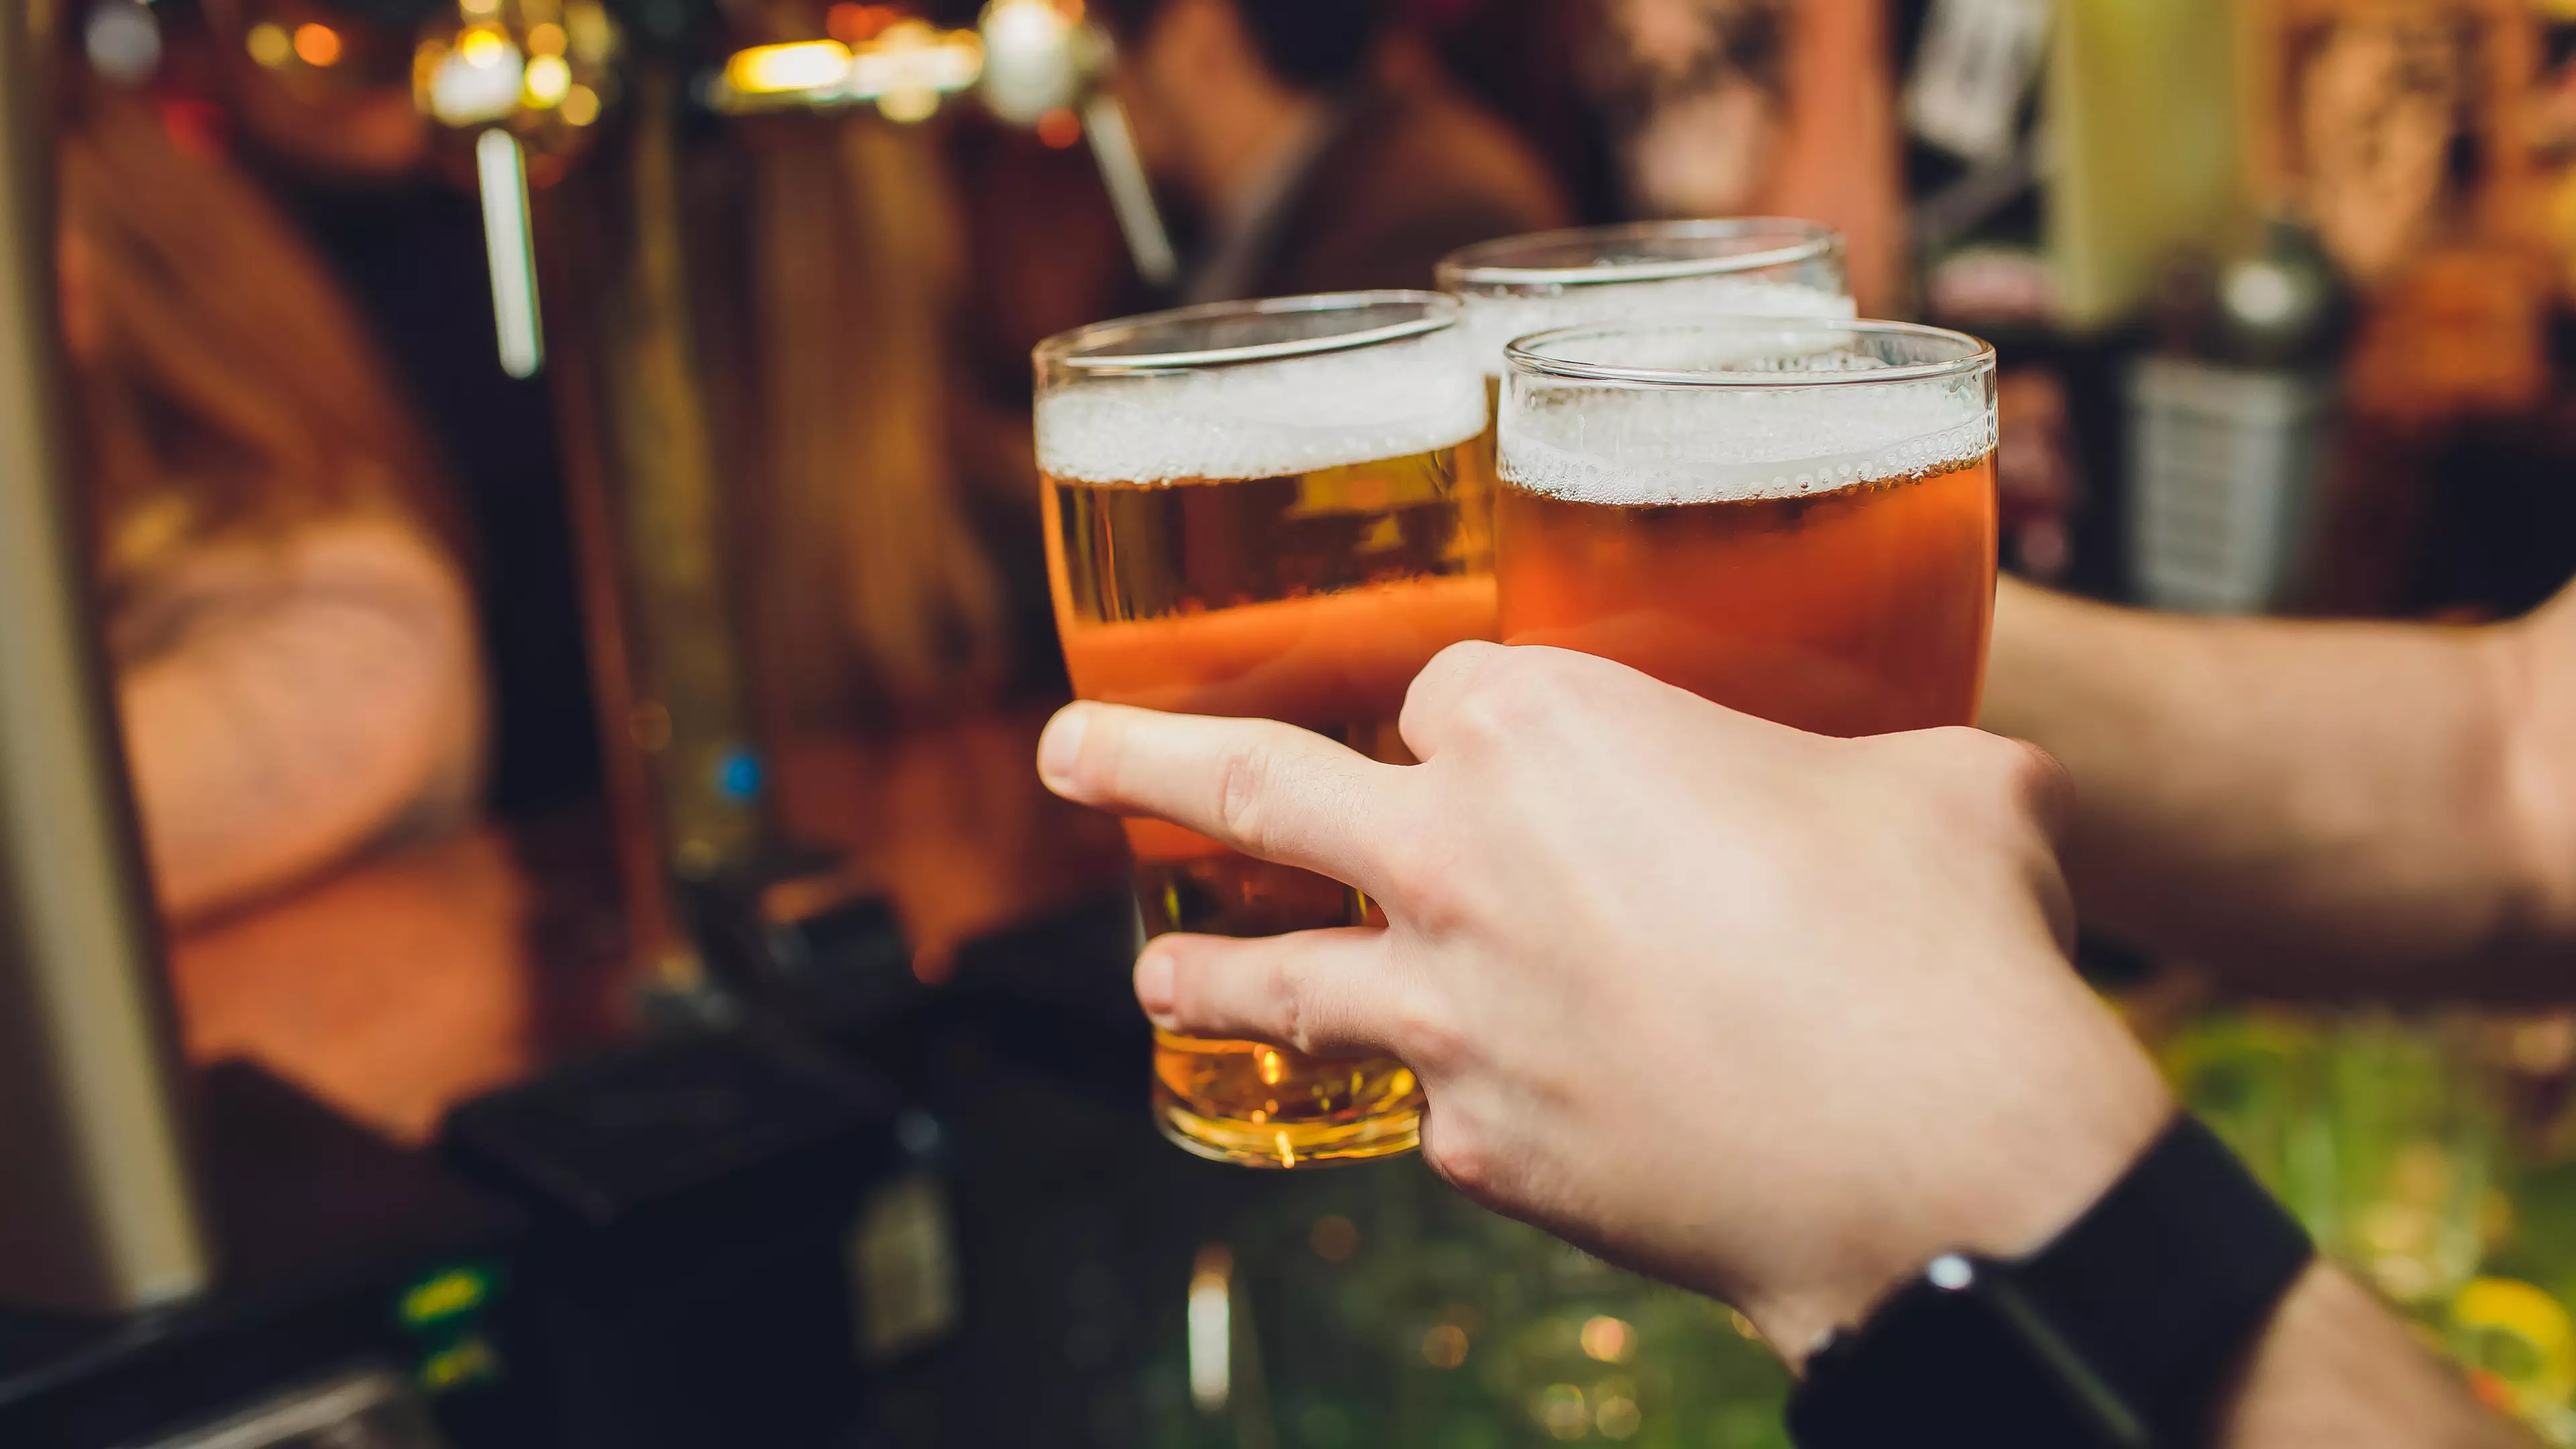 Three Pubs A Day Are Closing In The UK But There's A Way You Can Help